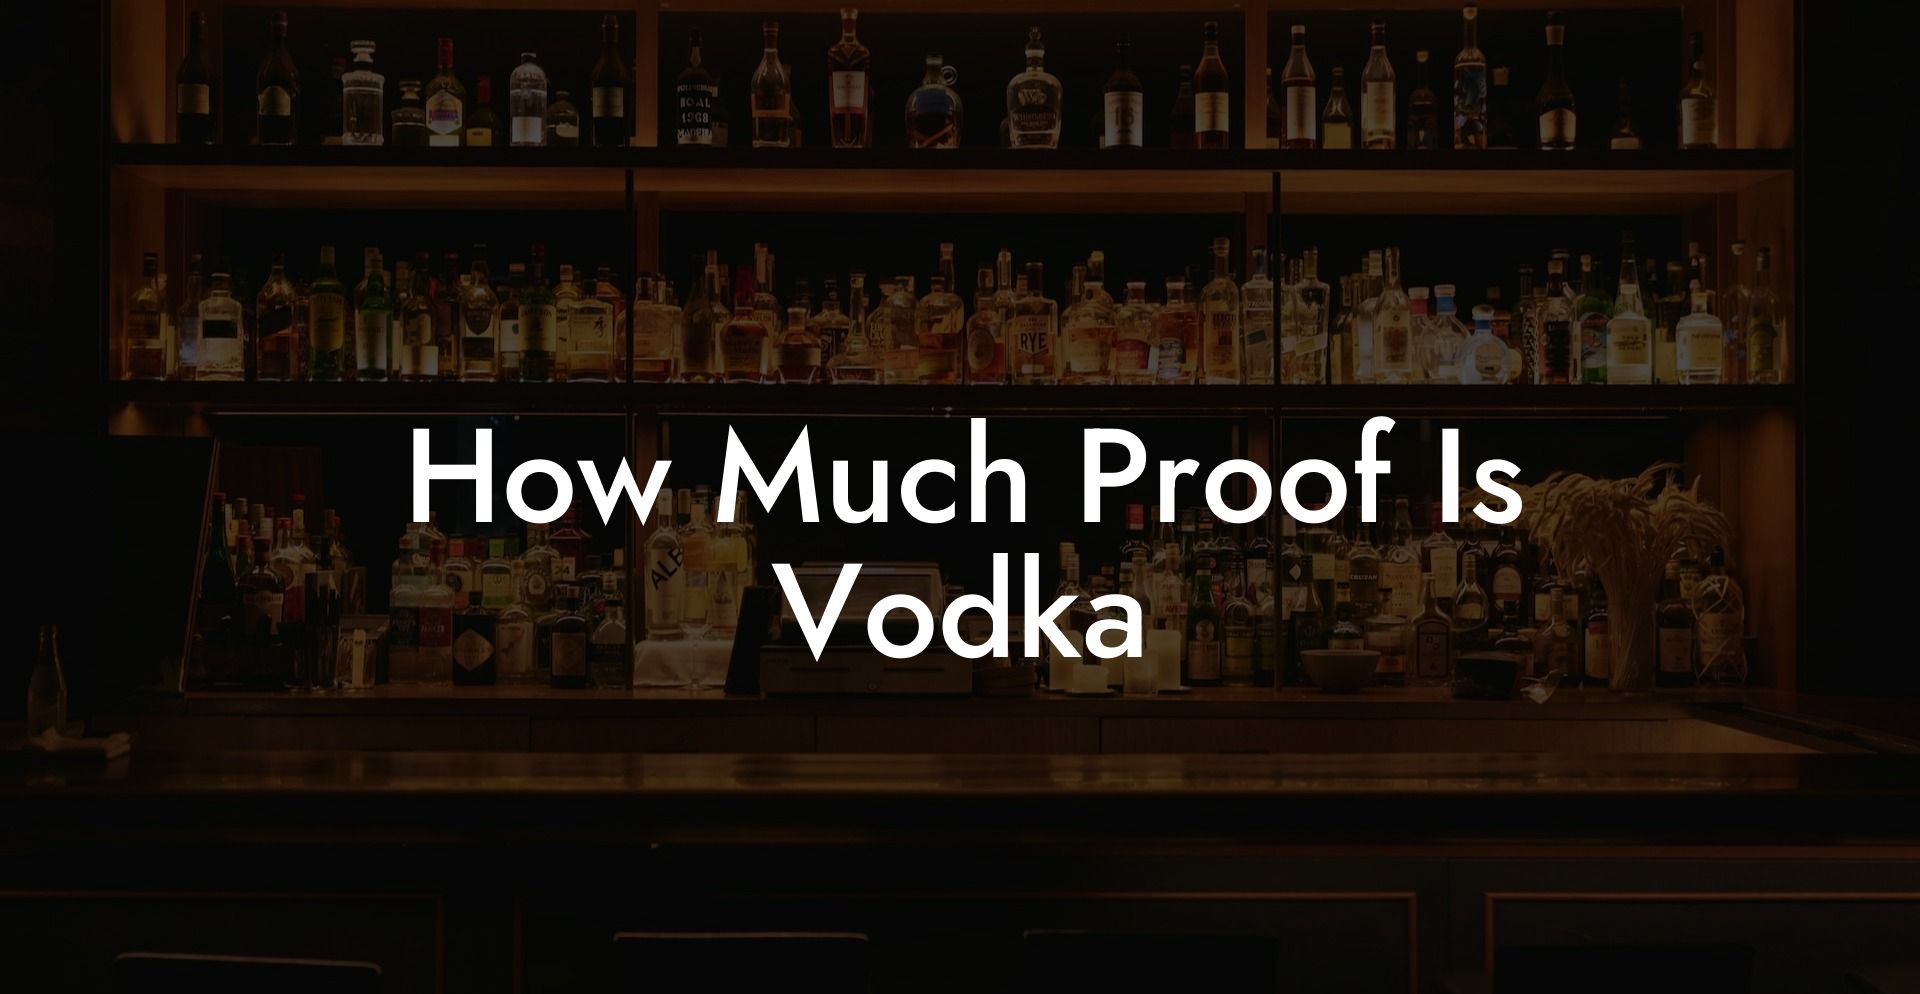 How Much Proof Is Vodka